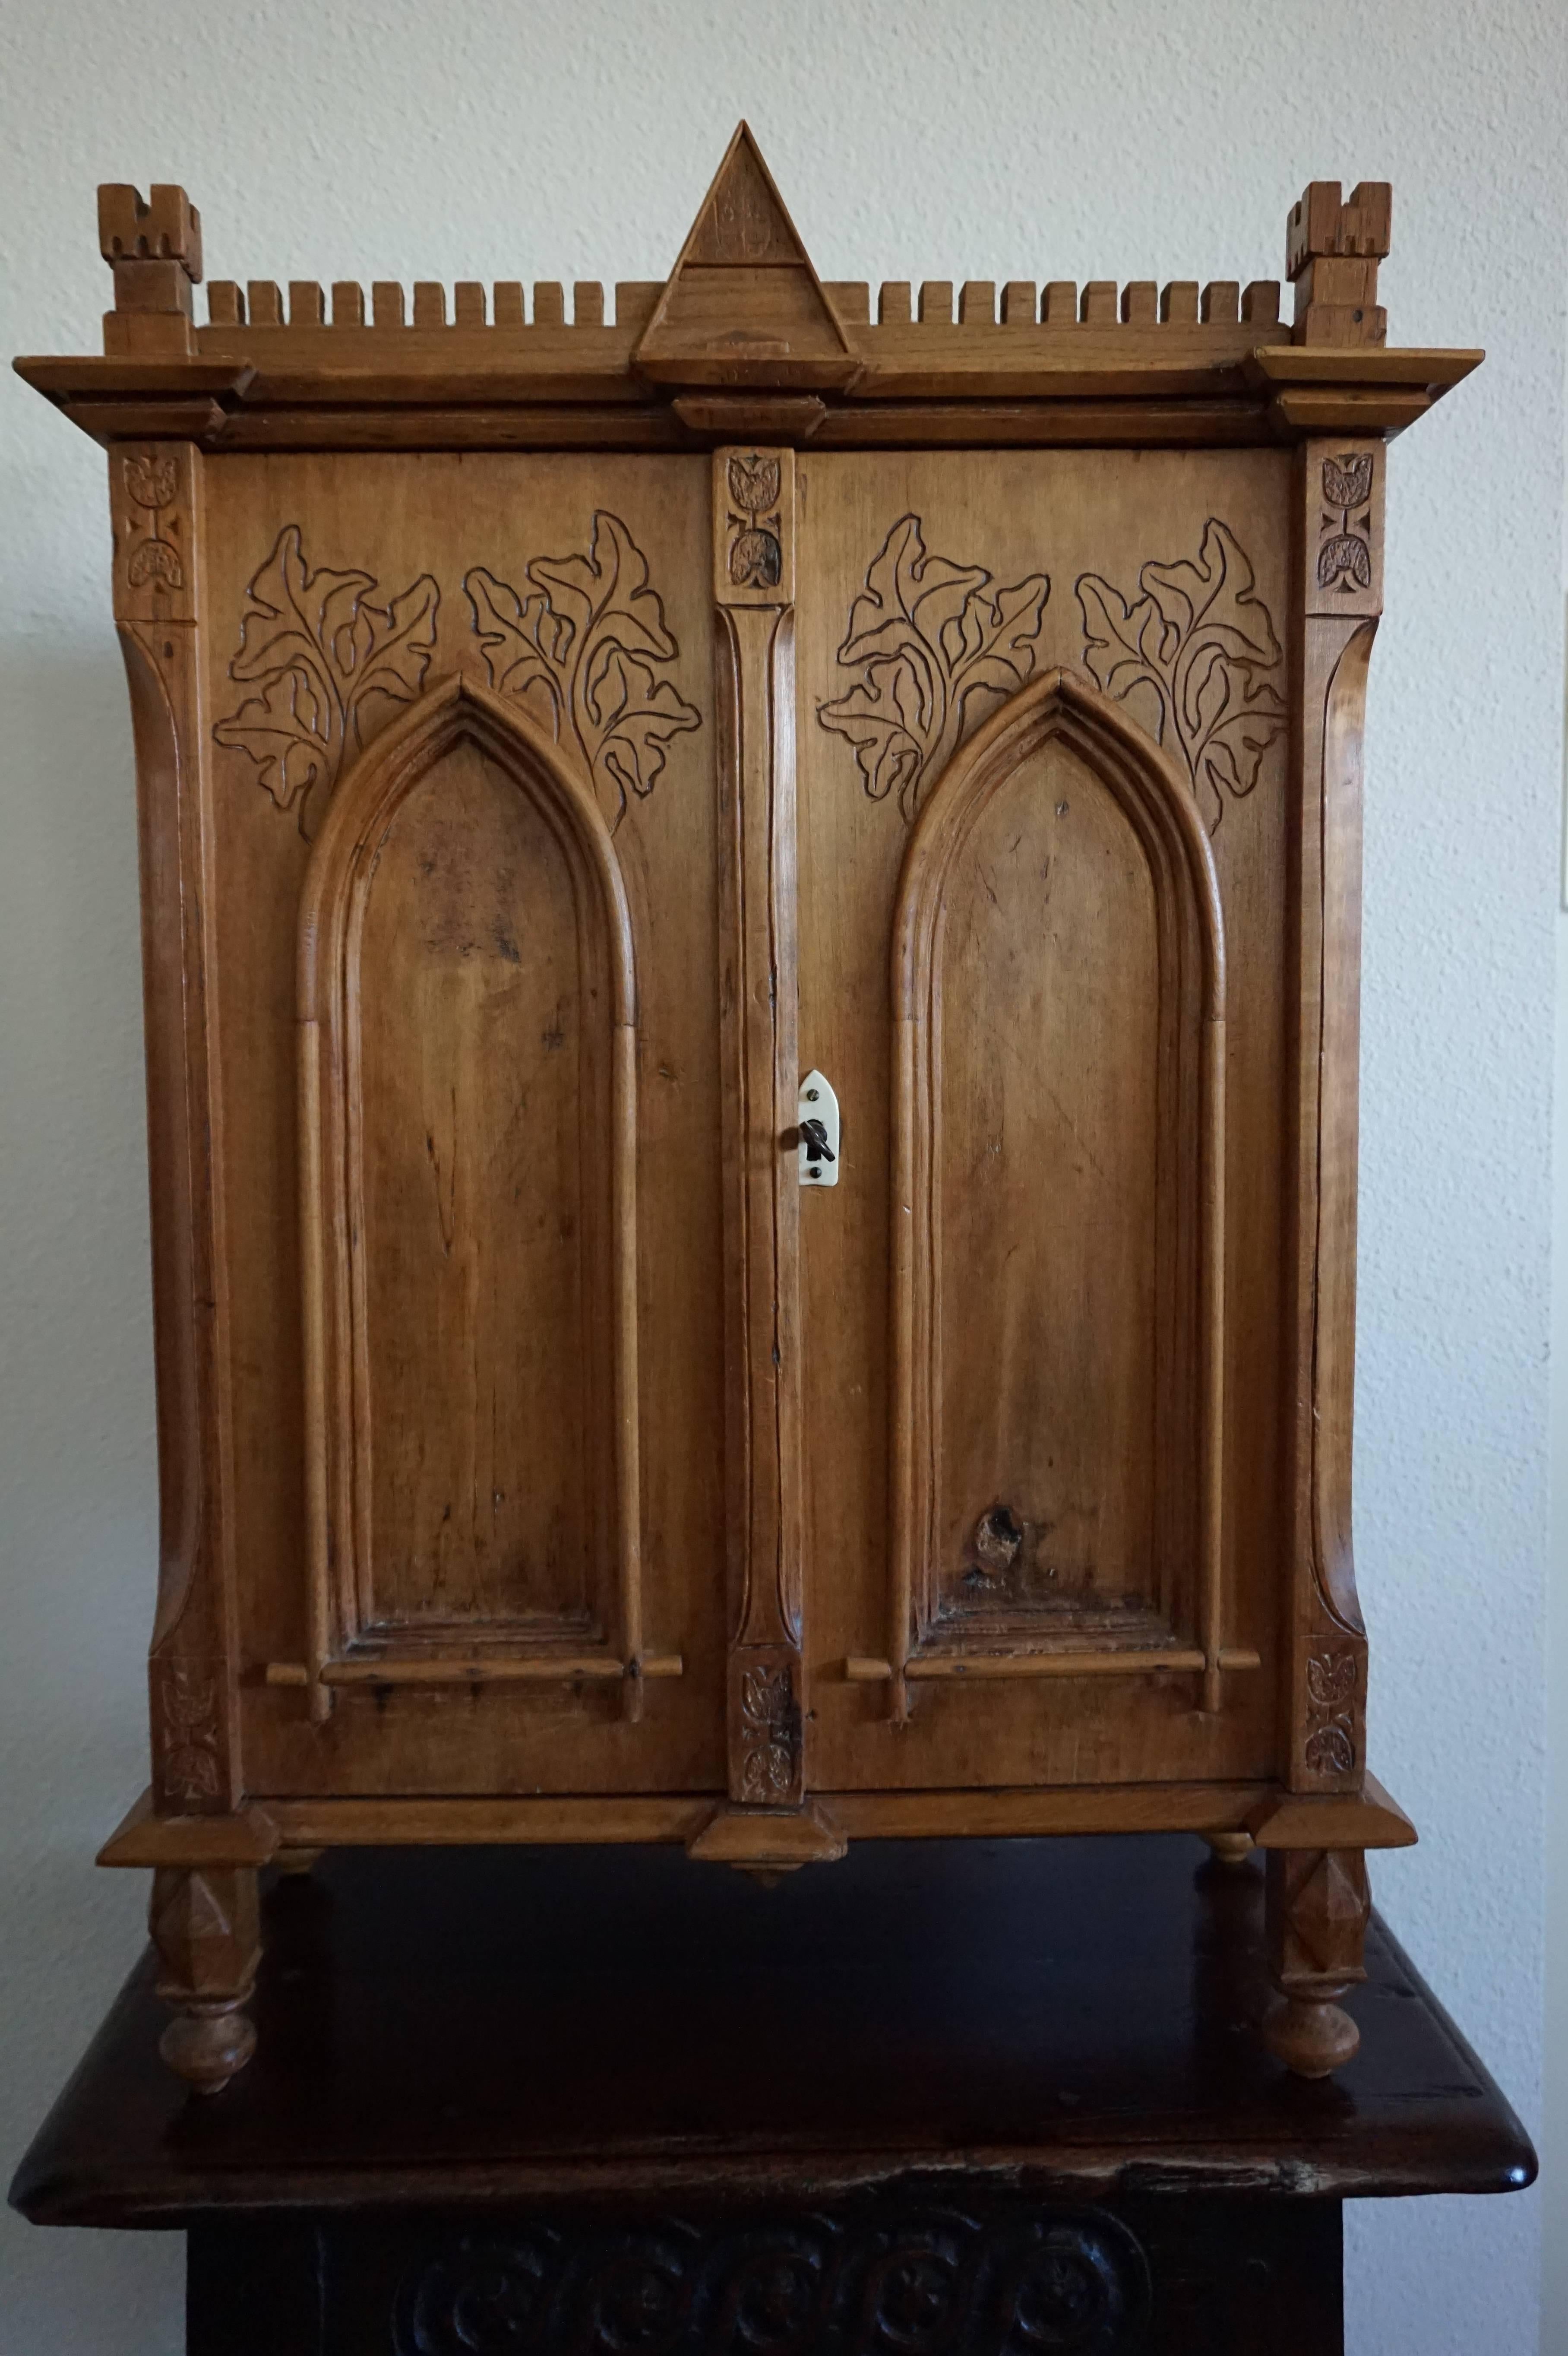 Unique miniature that can also be used as a wall cabinet.

This handcrafted Gothic Revival miniature cabinet has the shape of a medieval castle with towers at all corners, a crest in the middle (on top) and also panels in the front and on the sides